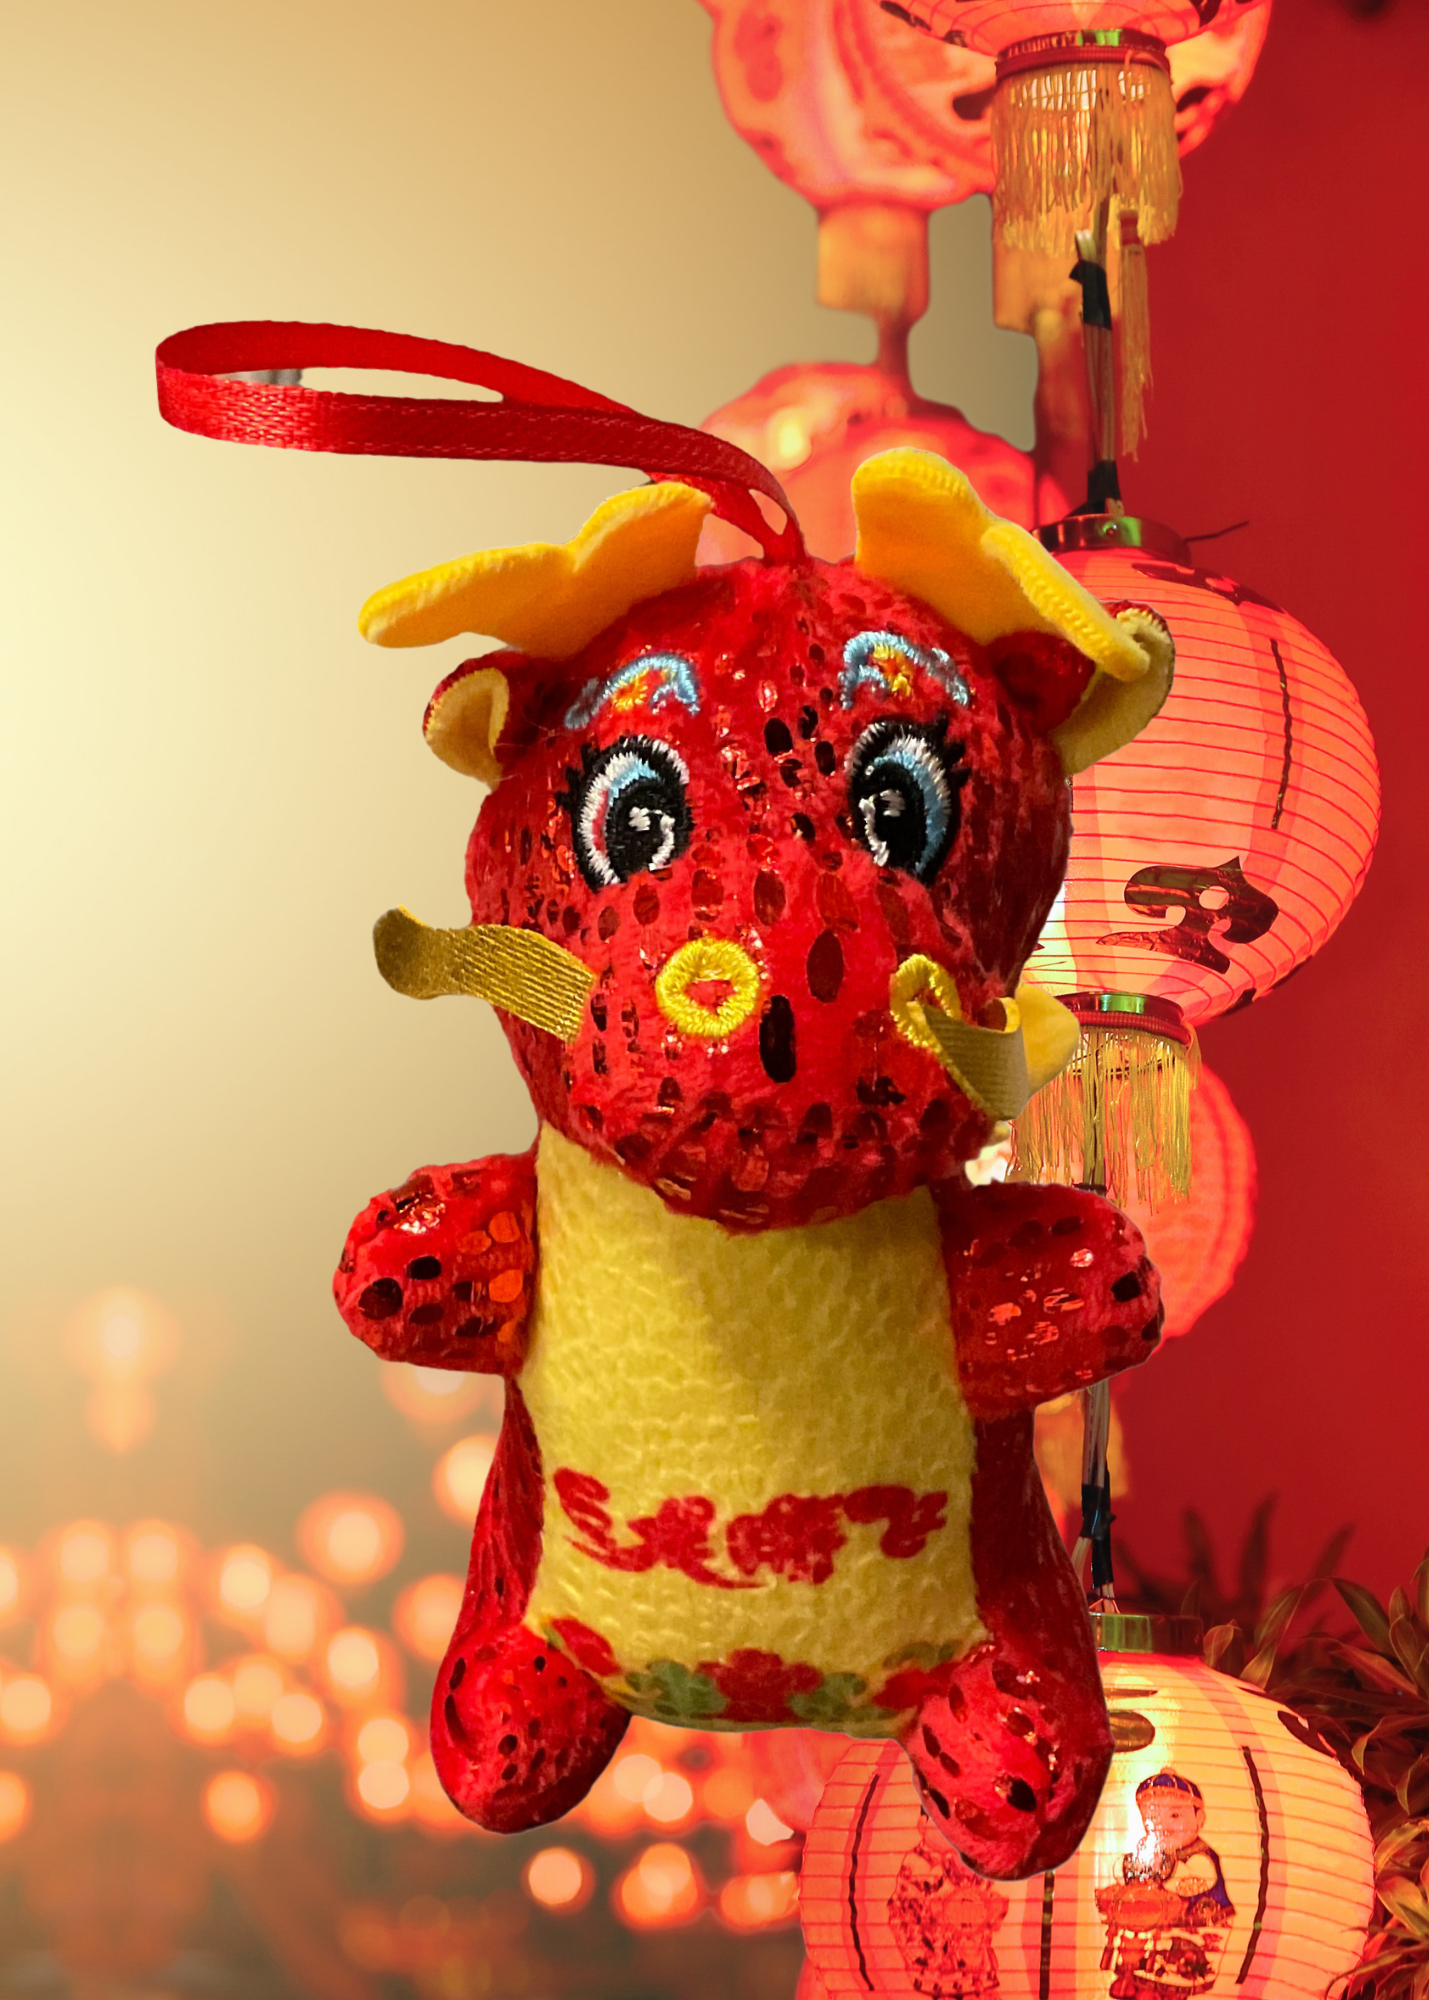 Chinese New Year / Lunar New Year